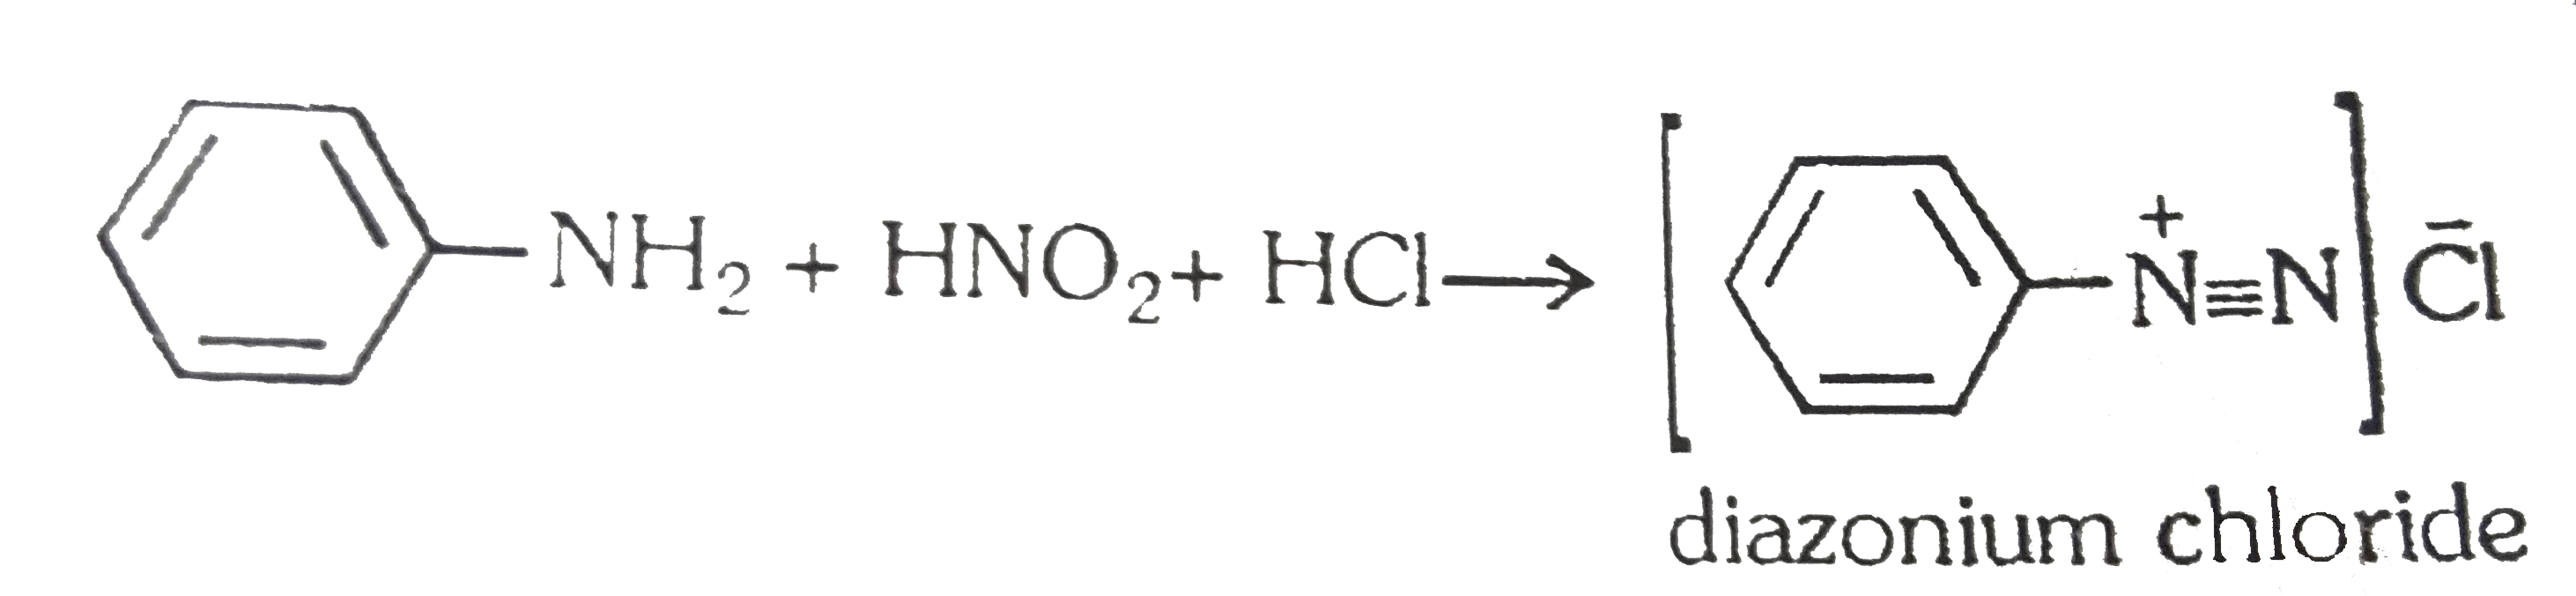 Diazonium salt formation and coupling reaction: When a reaction mixture of phenyl amine and nitrous acid is kept below 10^(@)C, a diazonium salt is formed. This reaction is called diazotization reaction.      The diazonium ion, -N(2)^(+), is rather unstable and decomposes readily to nitrogen. However, delocalization of the diazonium from pi-bond electron over a benzene ring phenyl diazonium sufficiently for it to form at low temperature. The phenyl diazonium ion behaves as an electrophile, and will attack another arene molecule such as phenol. Electrophilic subsitiution takes at the 4 position, producing 4-hydroxy phenyl azobenzene. The reaction is known as coupling reaction.      The compound formed is an energetically stable, yellow azo dye (the azo group is -N=N-) The stability is due to extensive delocalisation of electrons via the nitrogen- nitrogen double bonds.    The azo dye obtained on reacting 4-aminophenol with nitrous acid (in dilute hydrochloric acid) below 10^(@)C and coupling the resulting diazonium salt with phenol is :